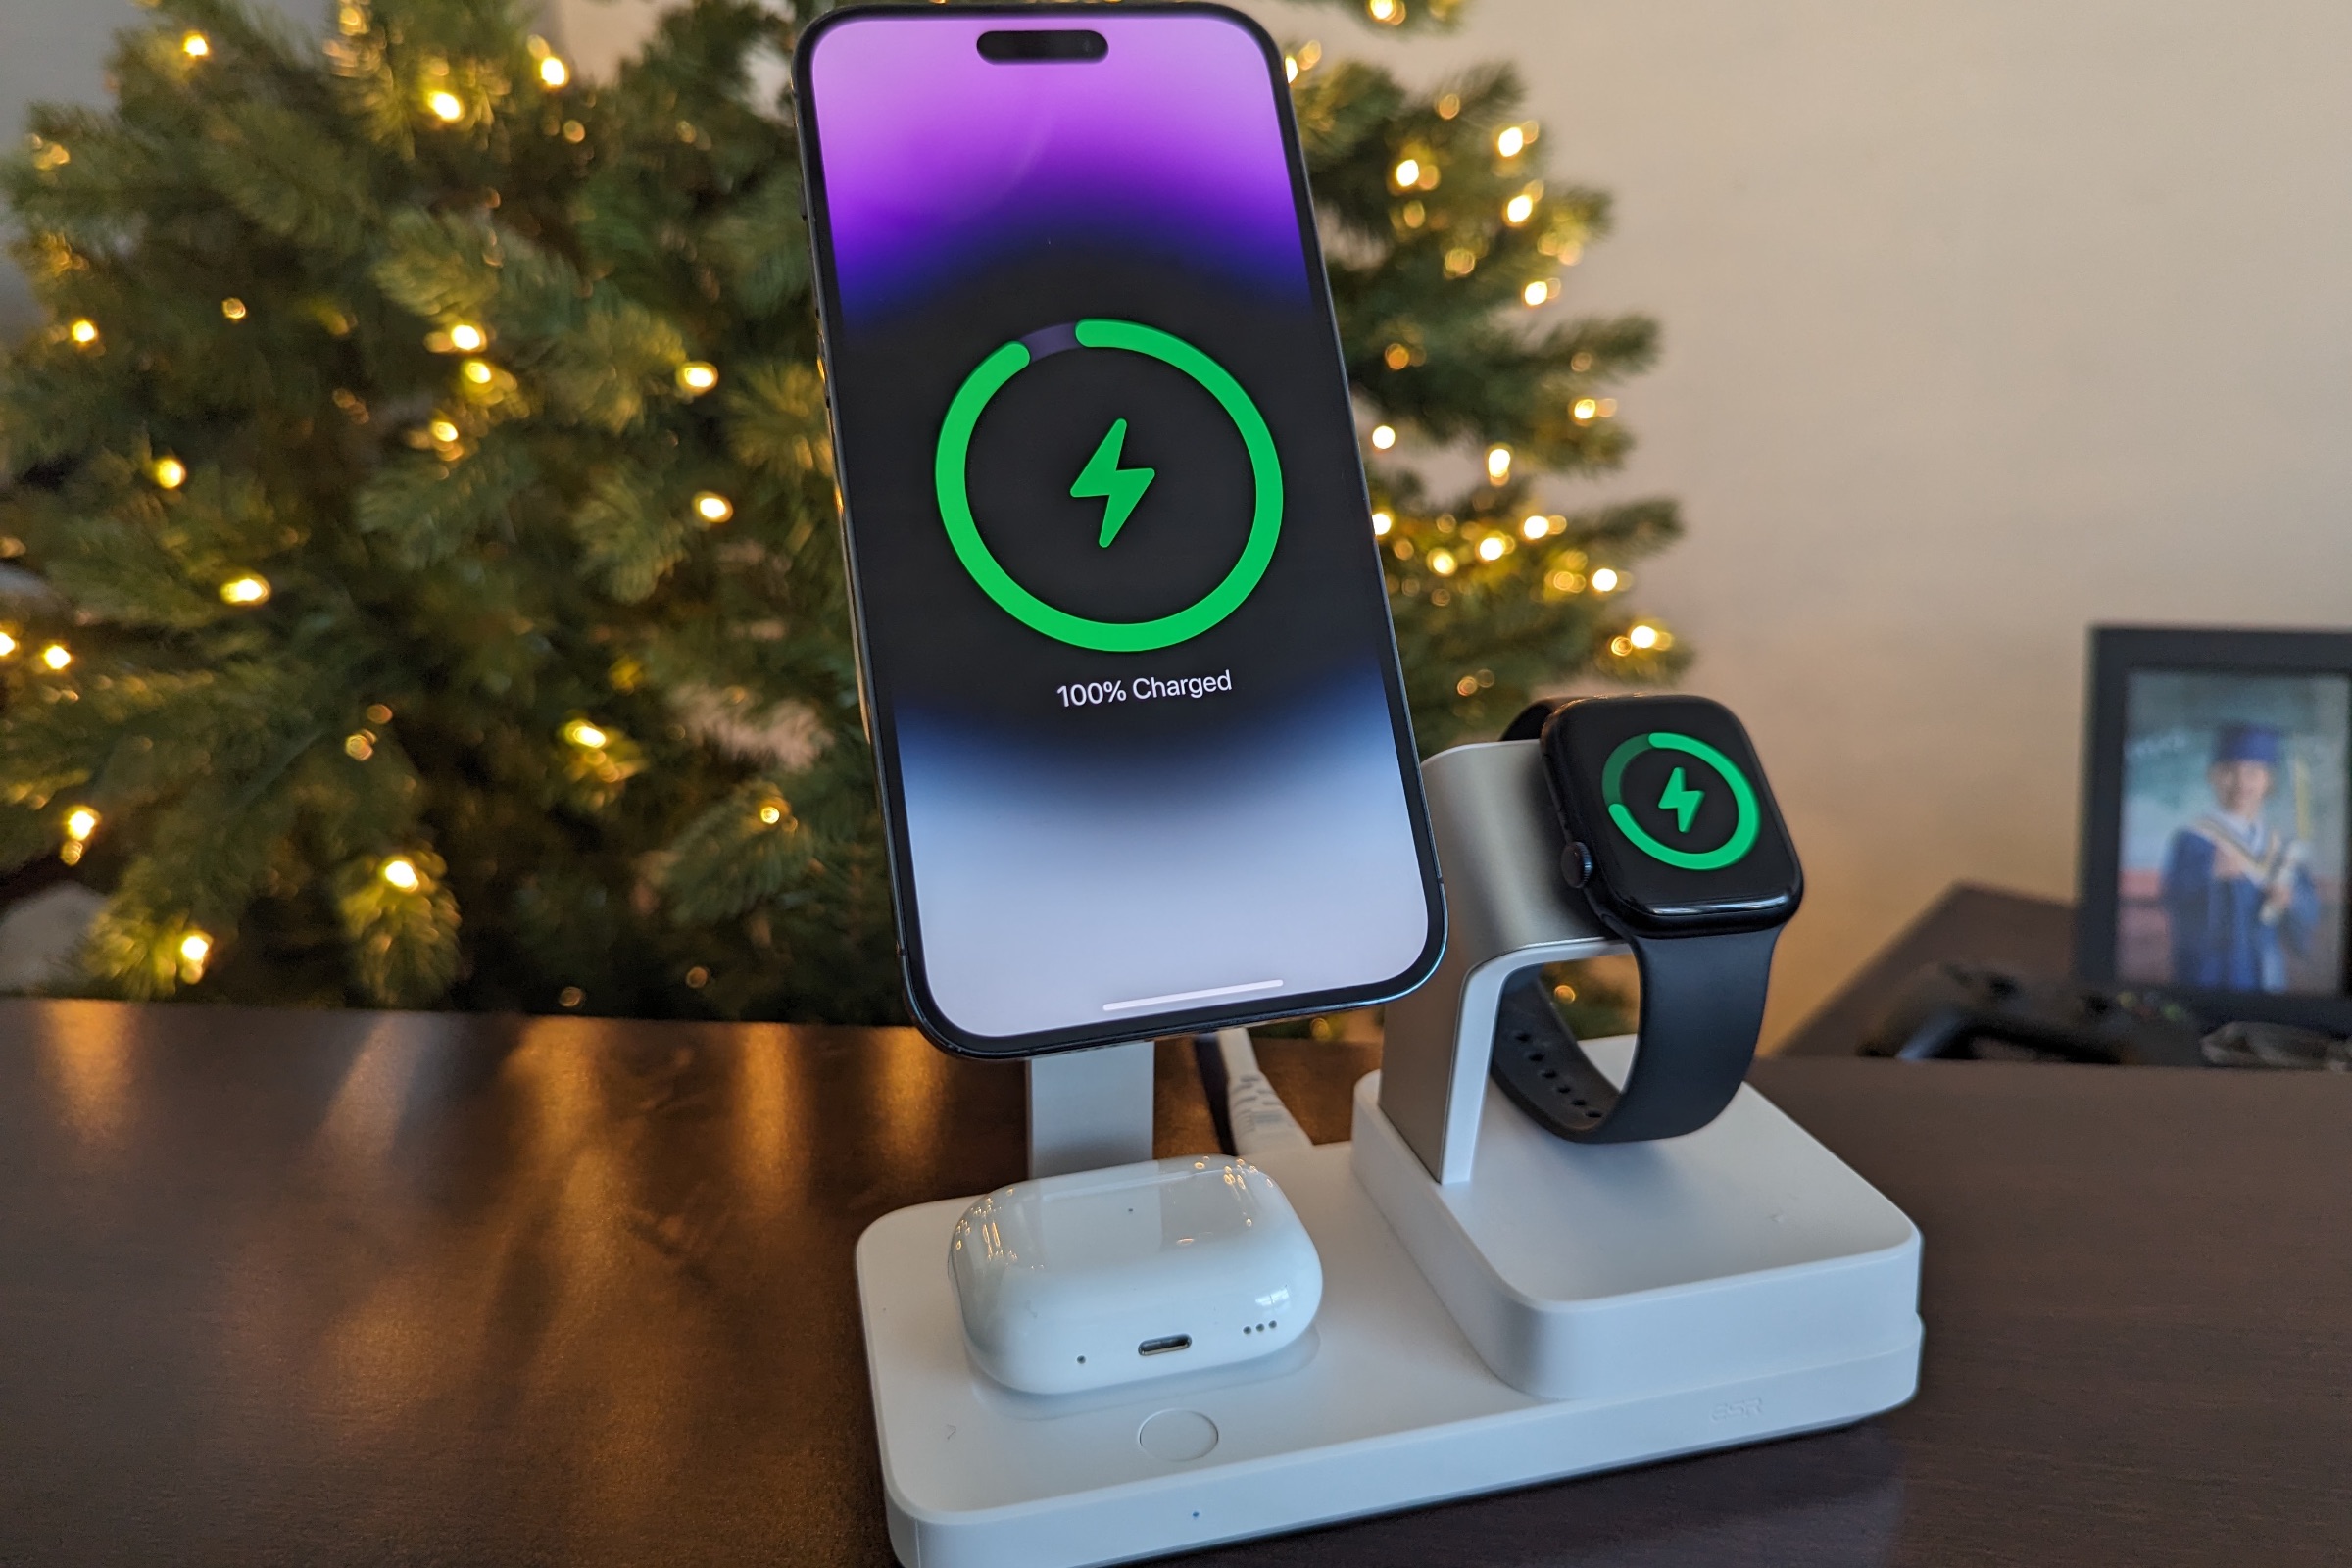 ESR 6-in-1 charging stand with iPhone 14 Pro Max, Apple Watch Series 8, and AirPods Pro showing charging status.